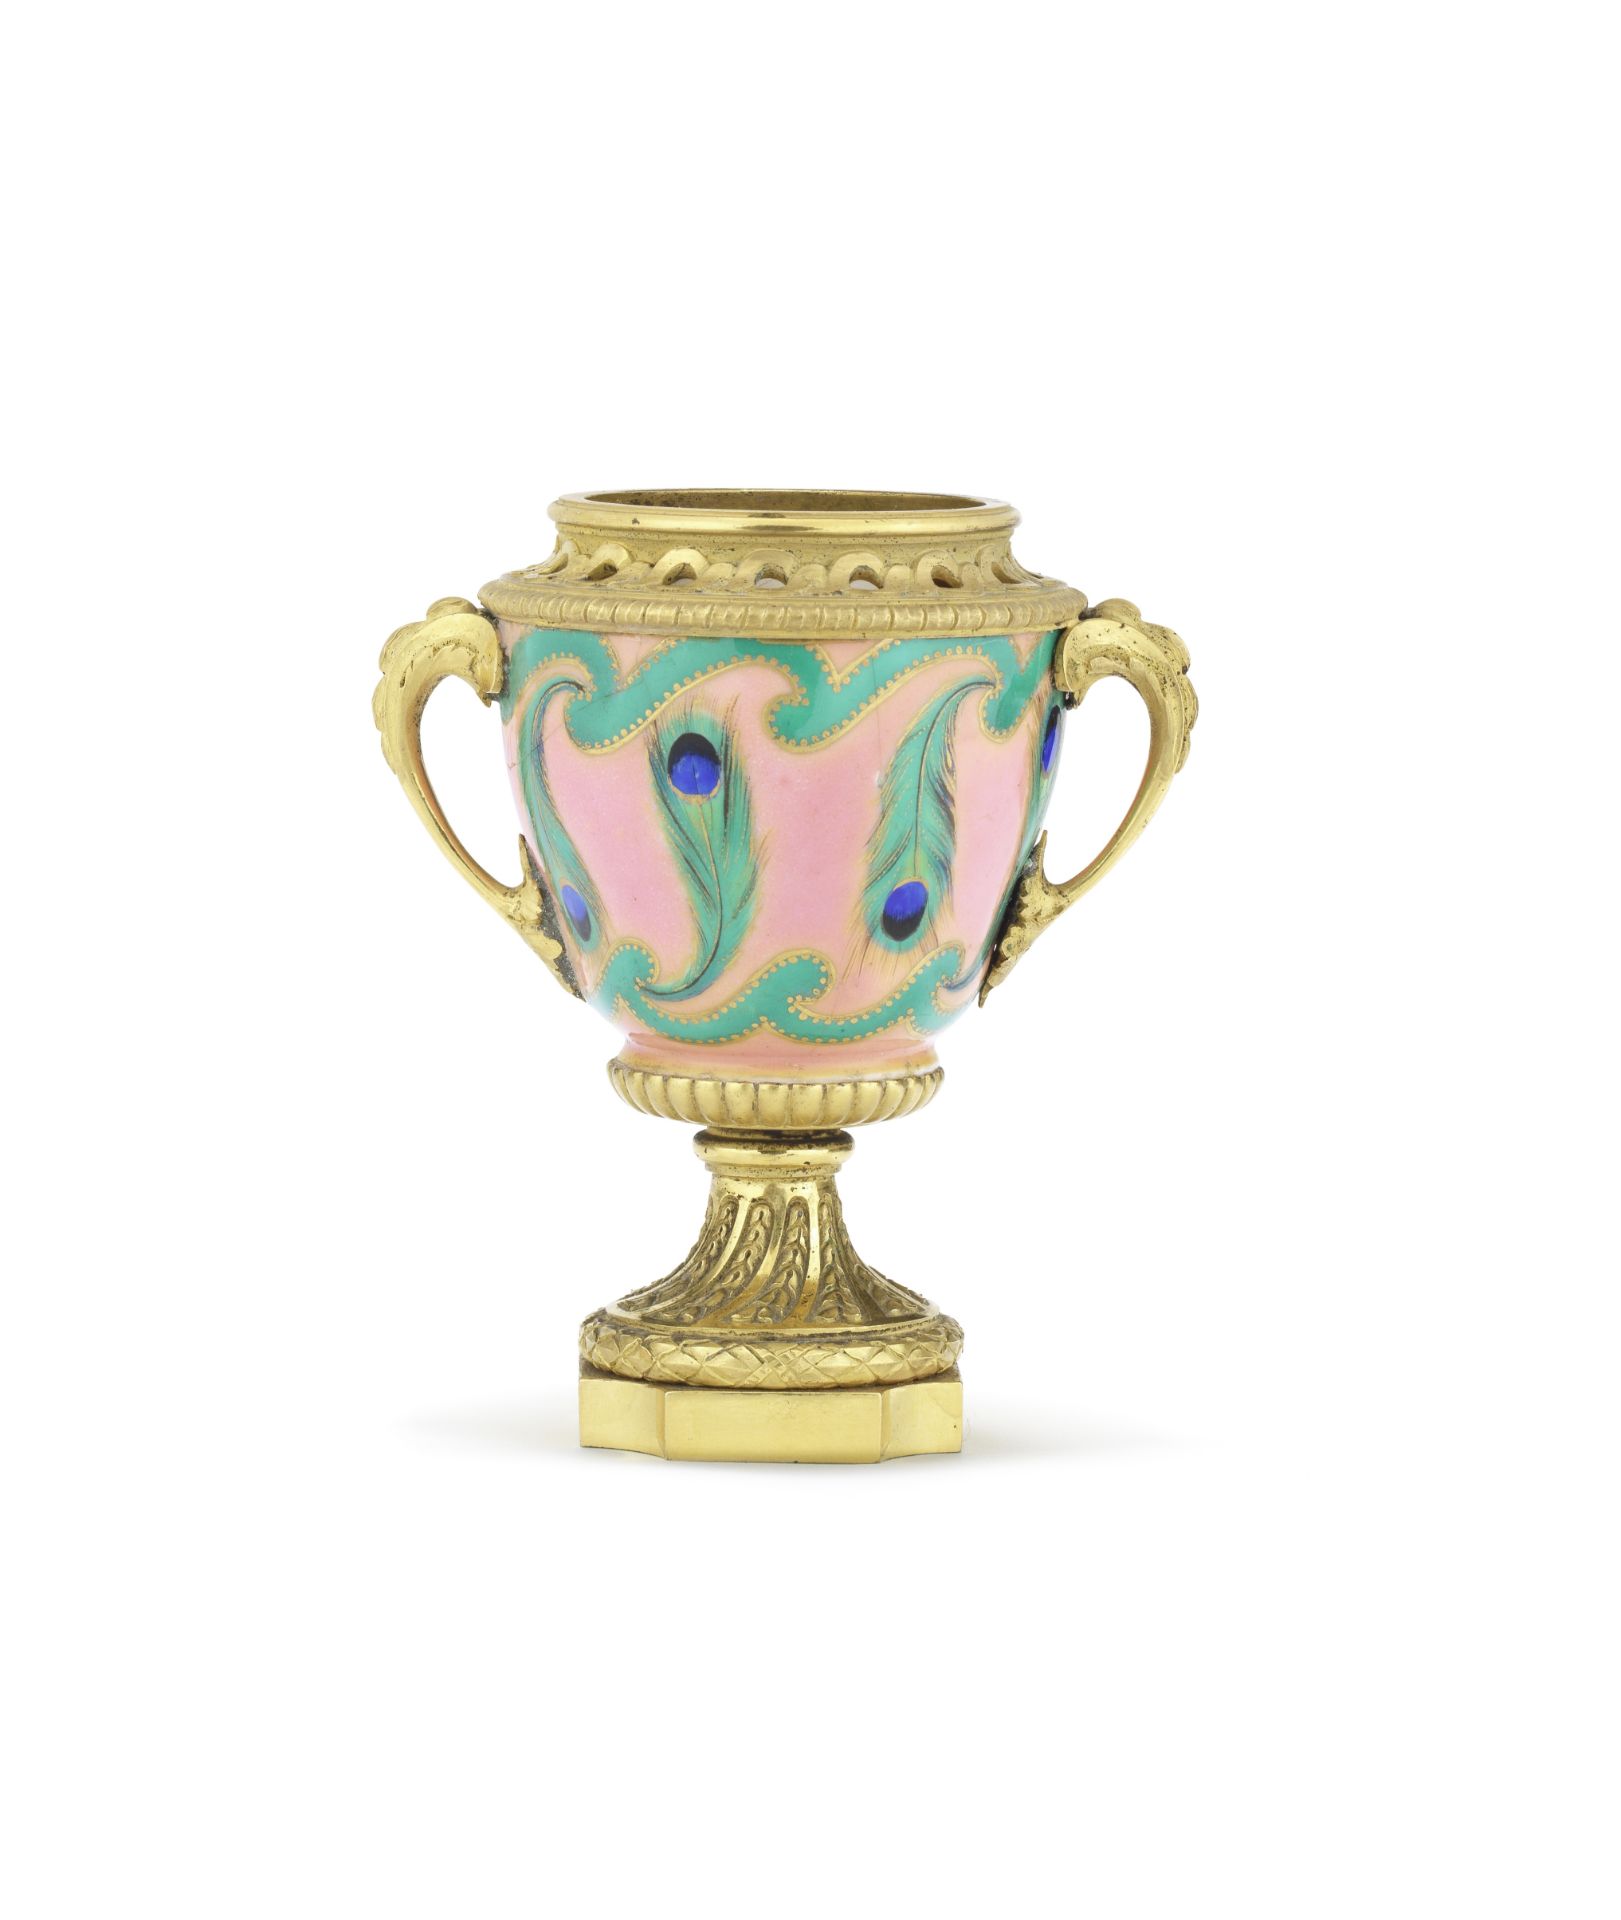 A very rare Sèvres pink-ground cup, circa 1759, mounted in the 19th century